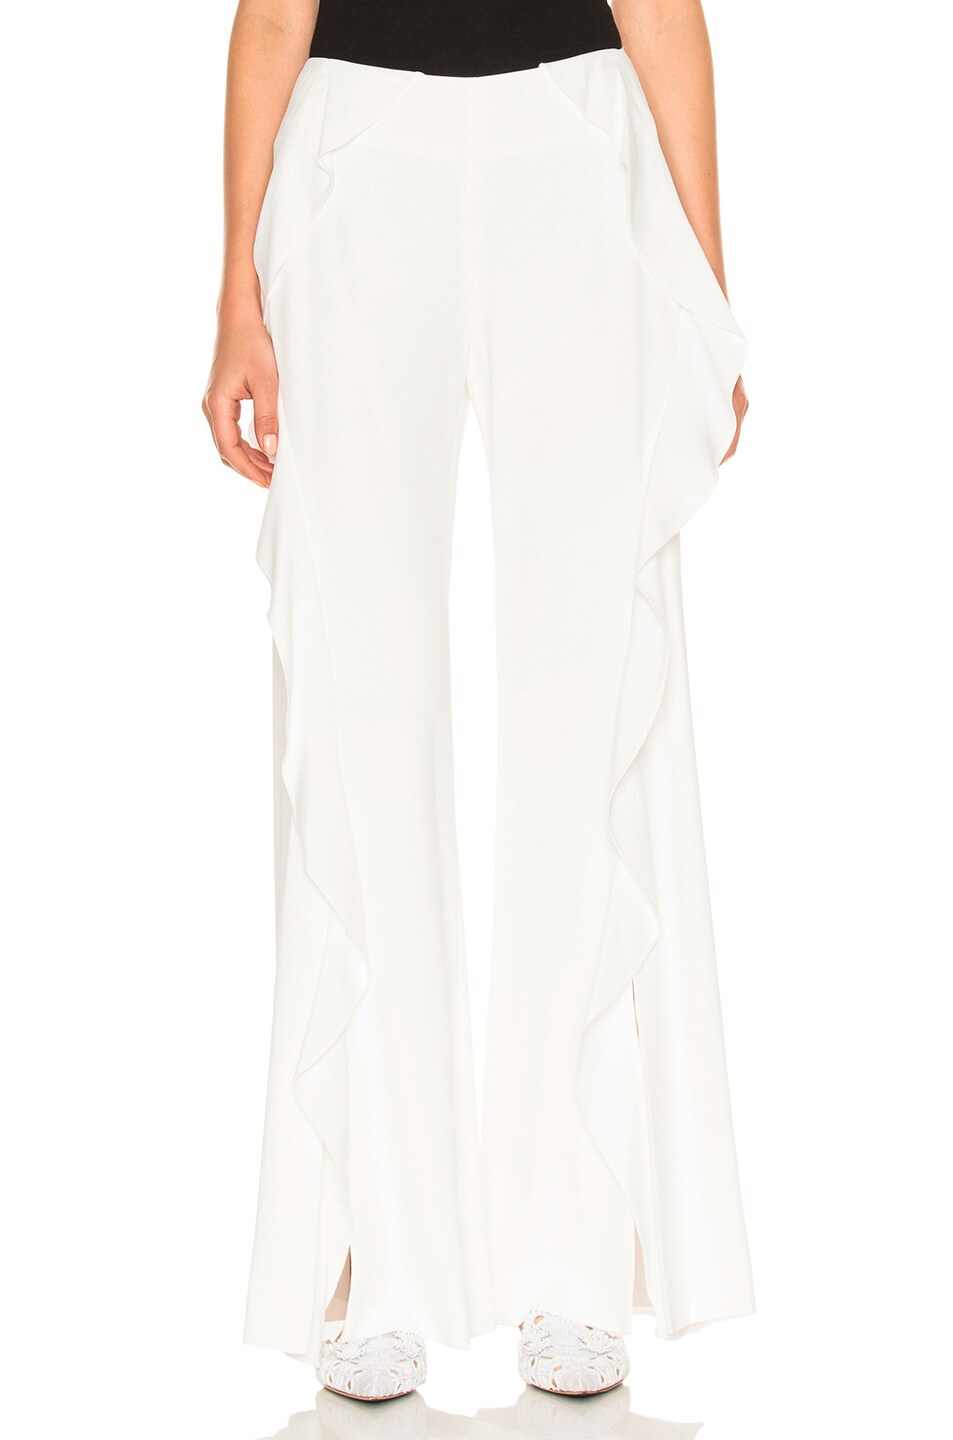 Image 1 of SIMKHAI Cocktail Stretch Ruffle Pant in White